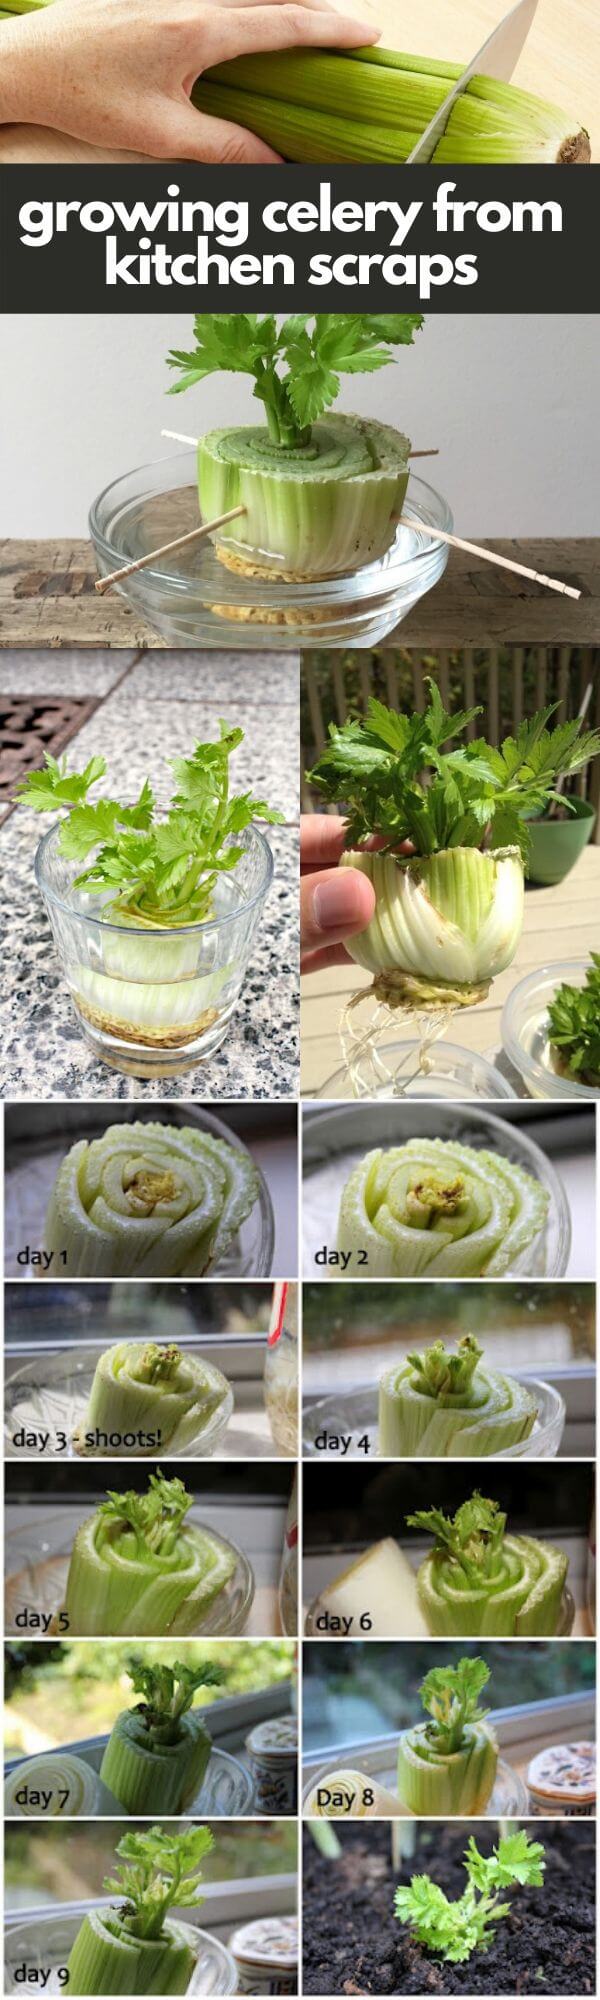 How to grow celery from kitchen scraps